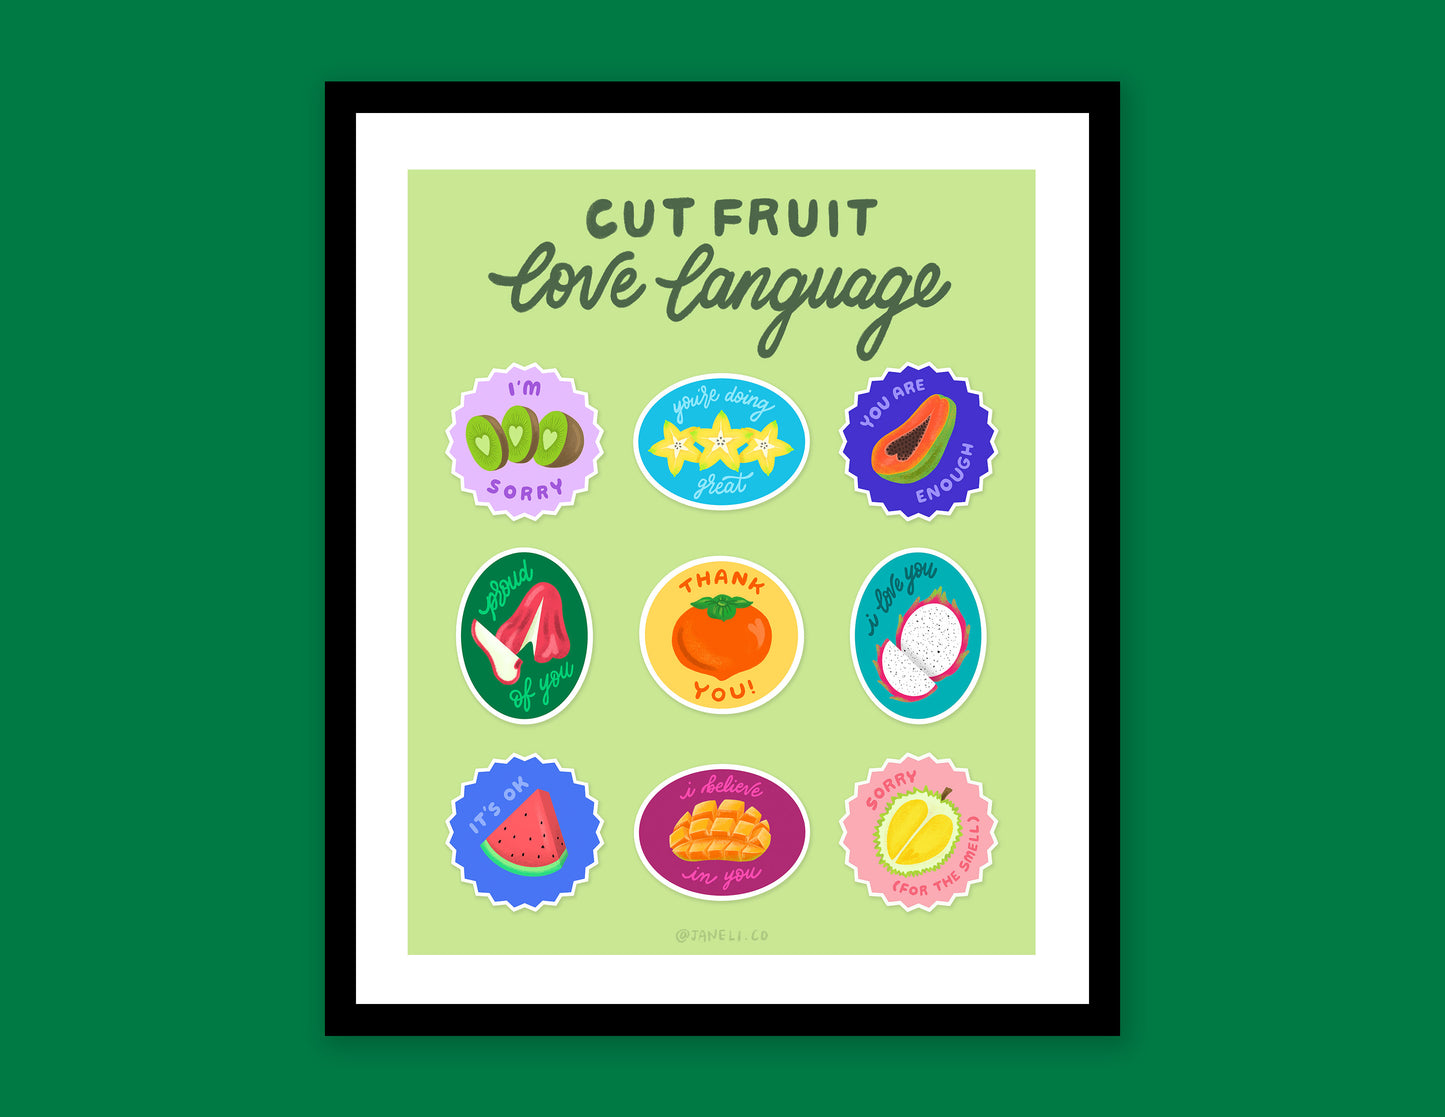 A digital mock of a framed JaneLi.Co print that says "Cut Fruit Love Language" with 9 different fruit stickers with different messages like "I love you", "I'm sorry", and "I'm proud of you" over a green background.